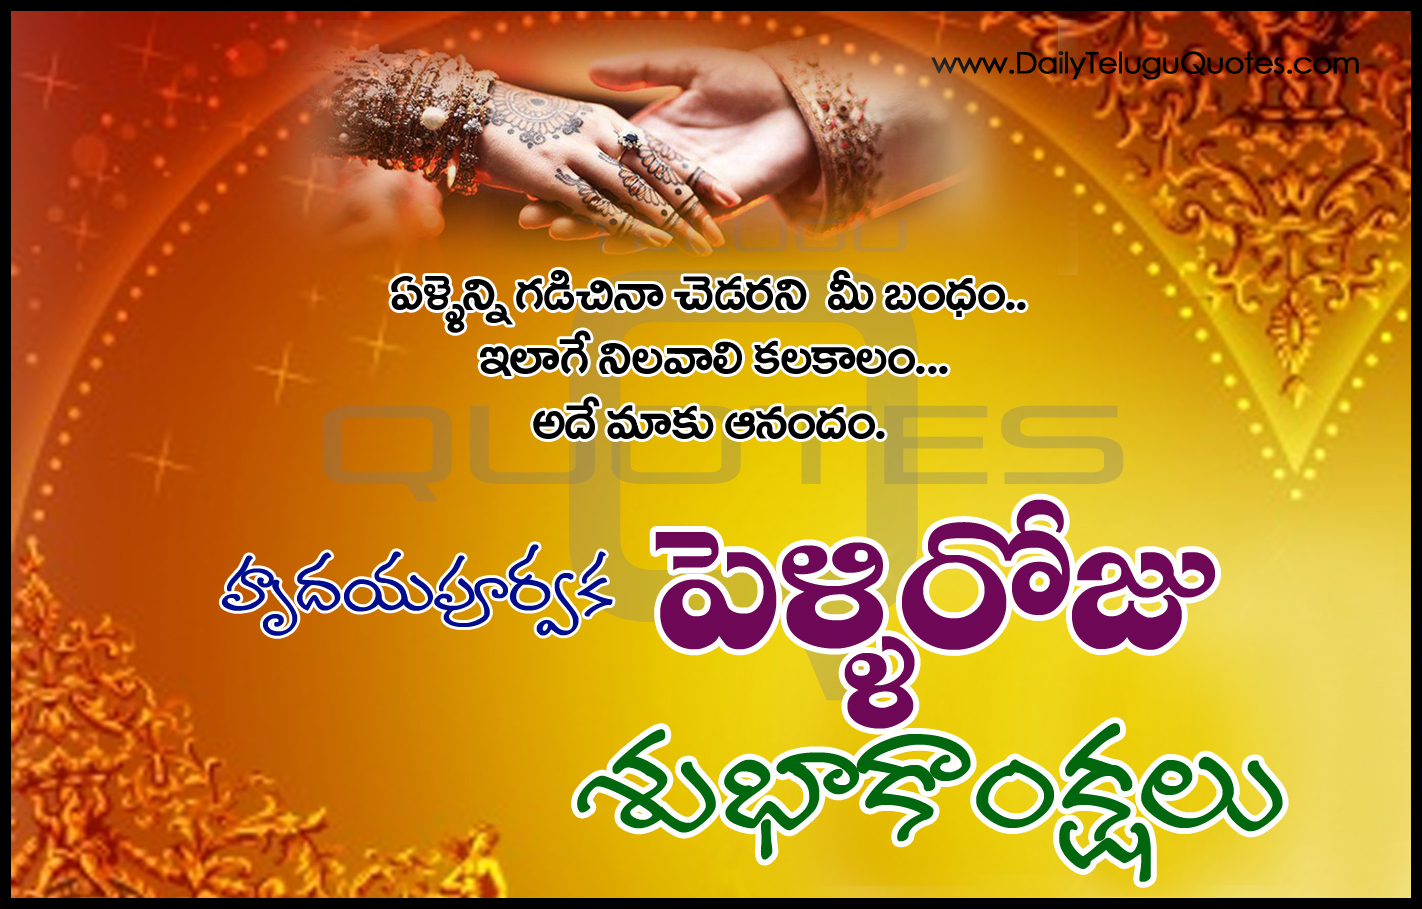 Marriage Day Telugu QUotes Wallpapers s